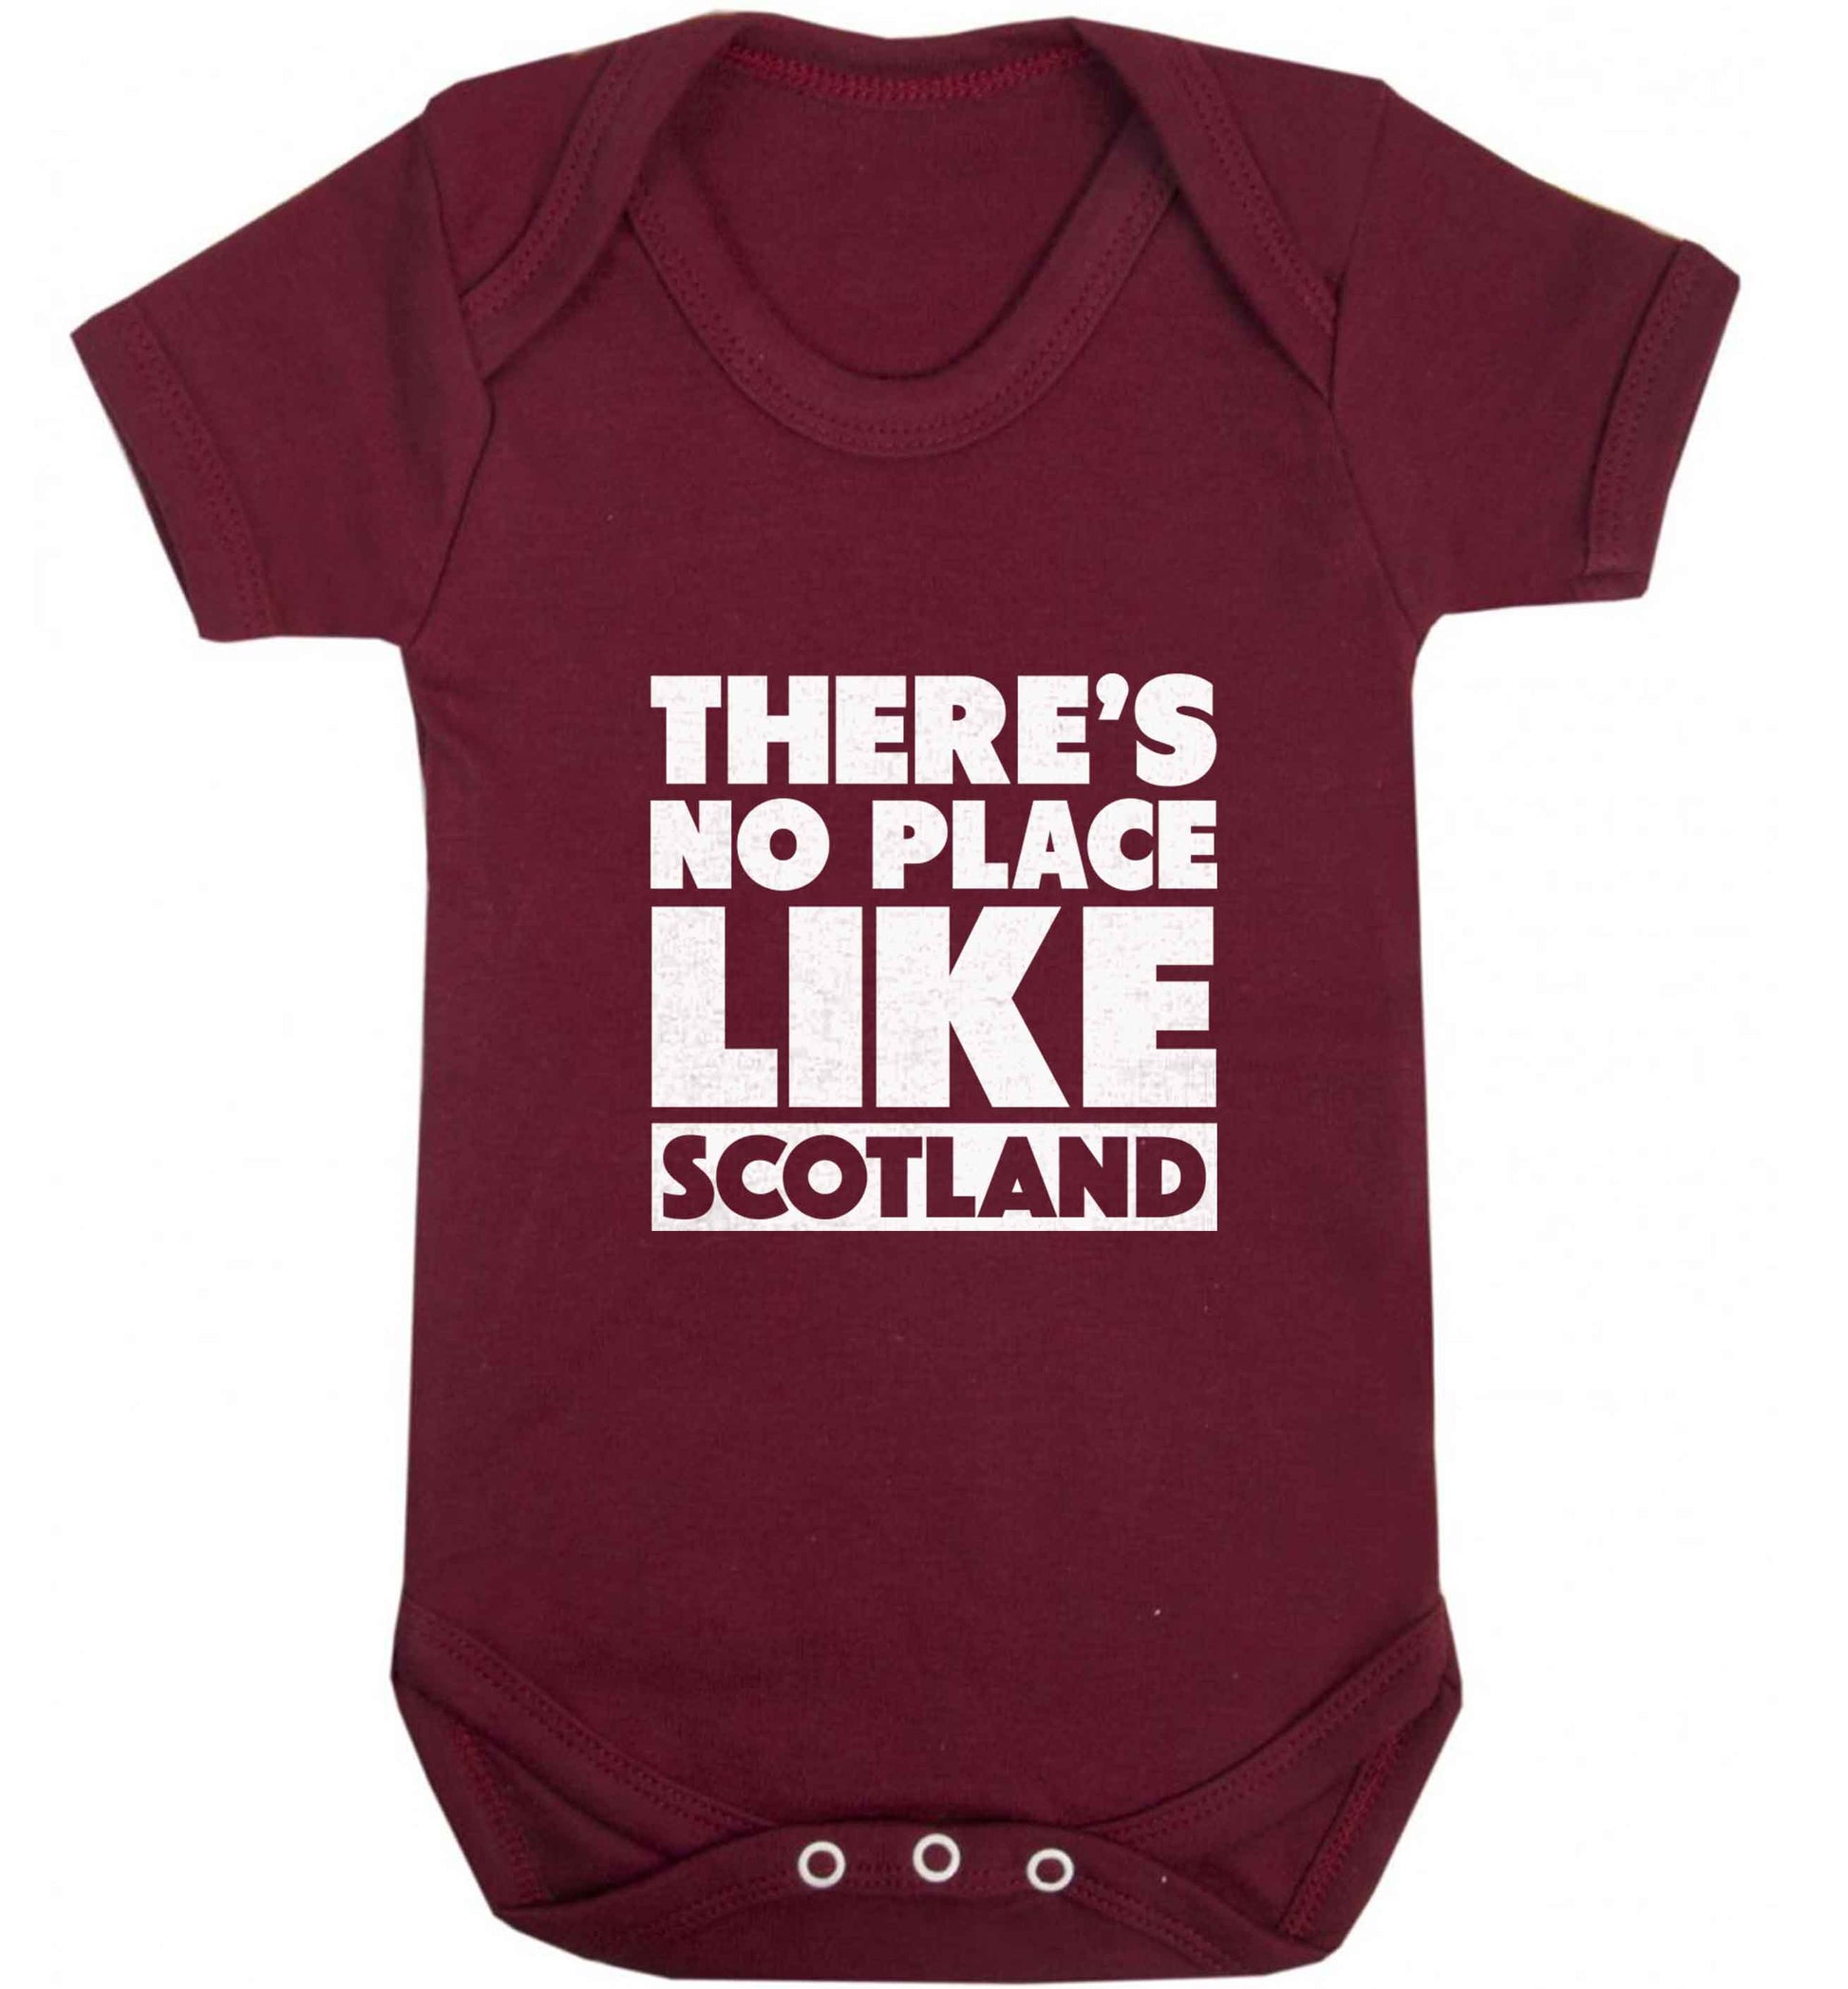 There's no place like Scotland baby vest maroon 18-24 months